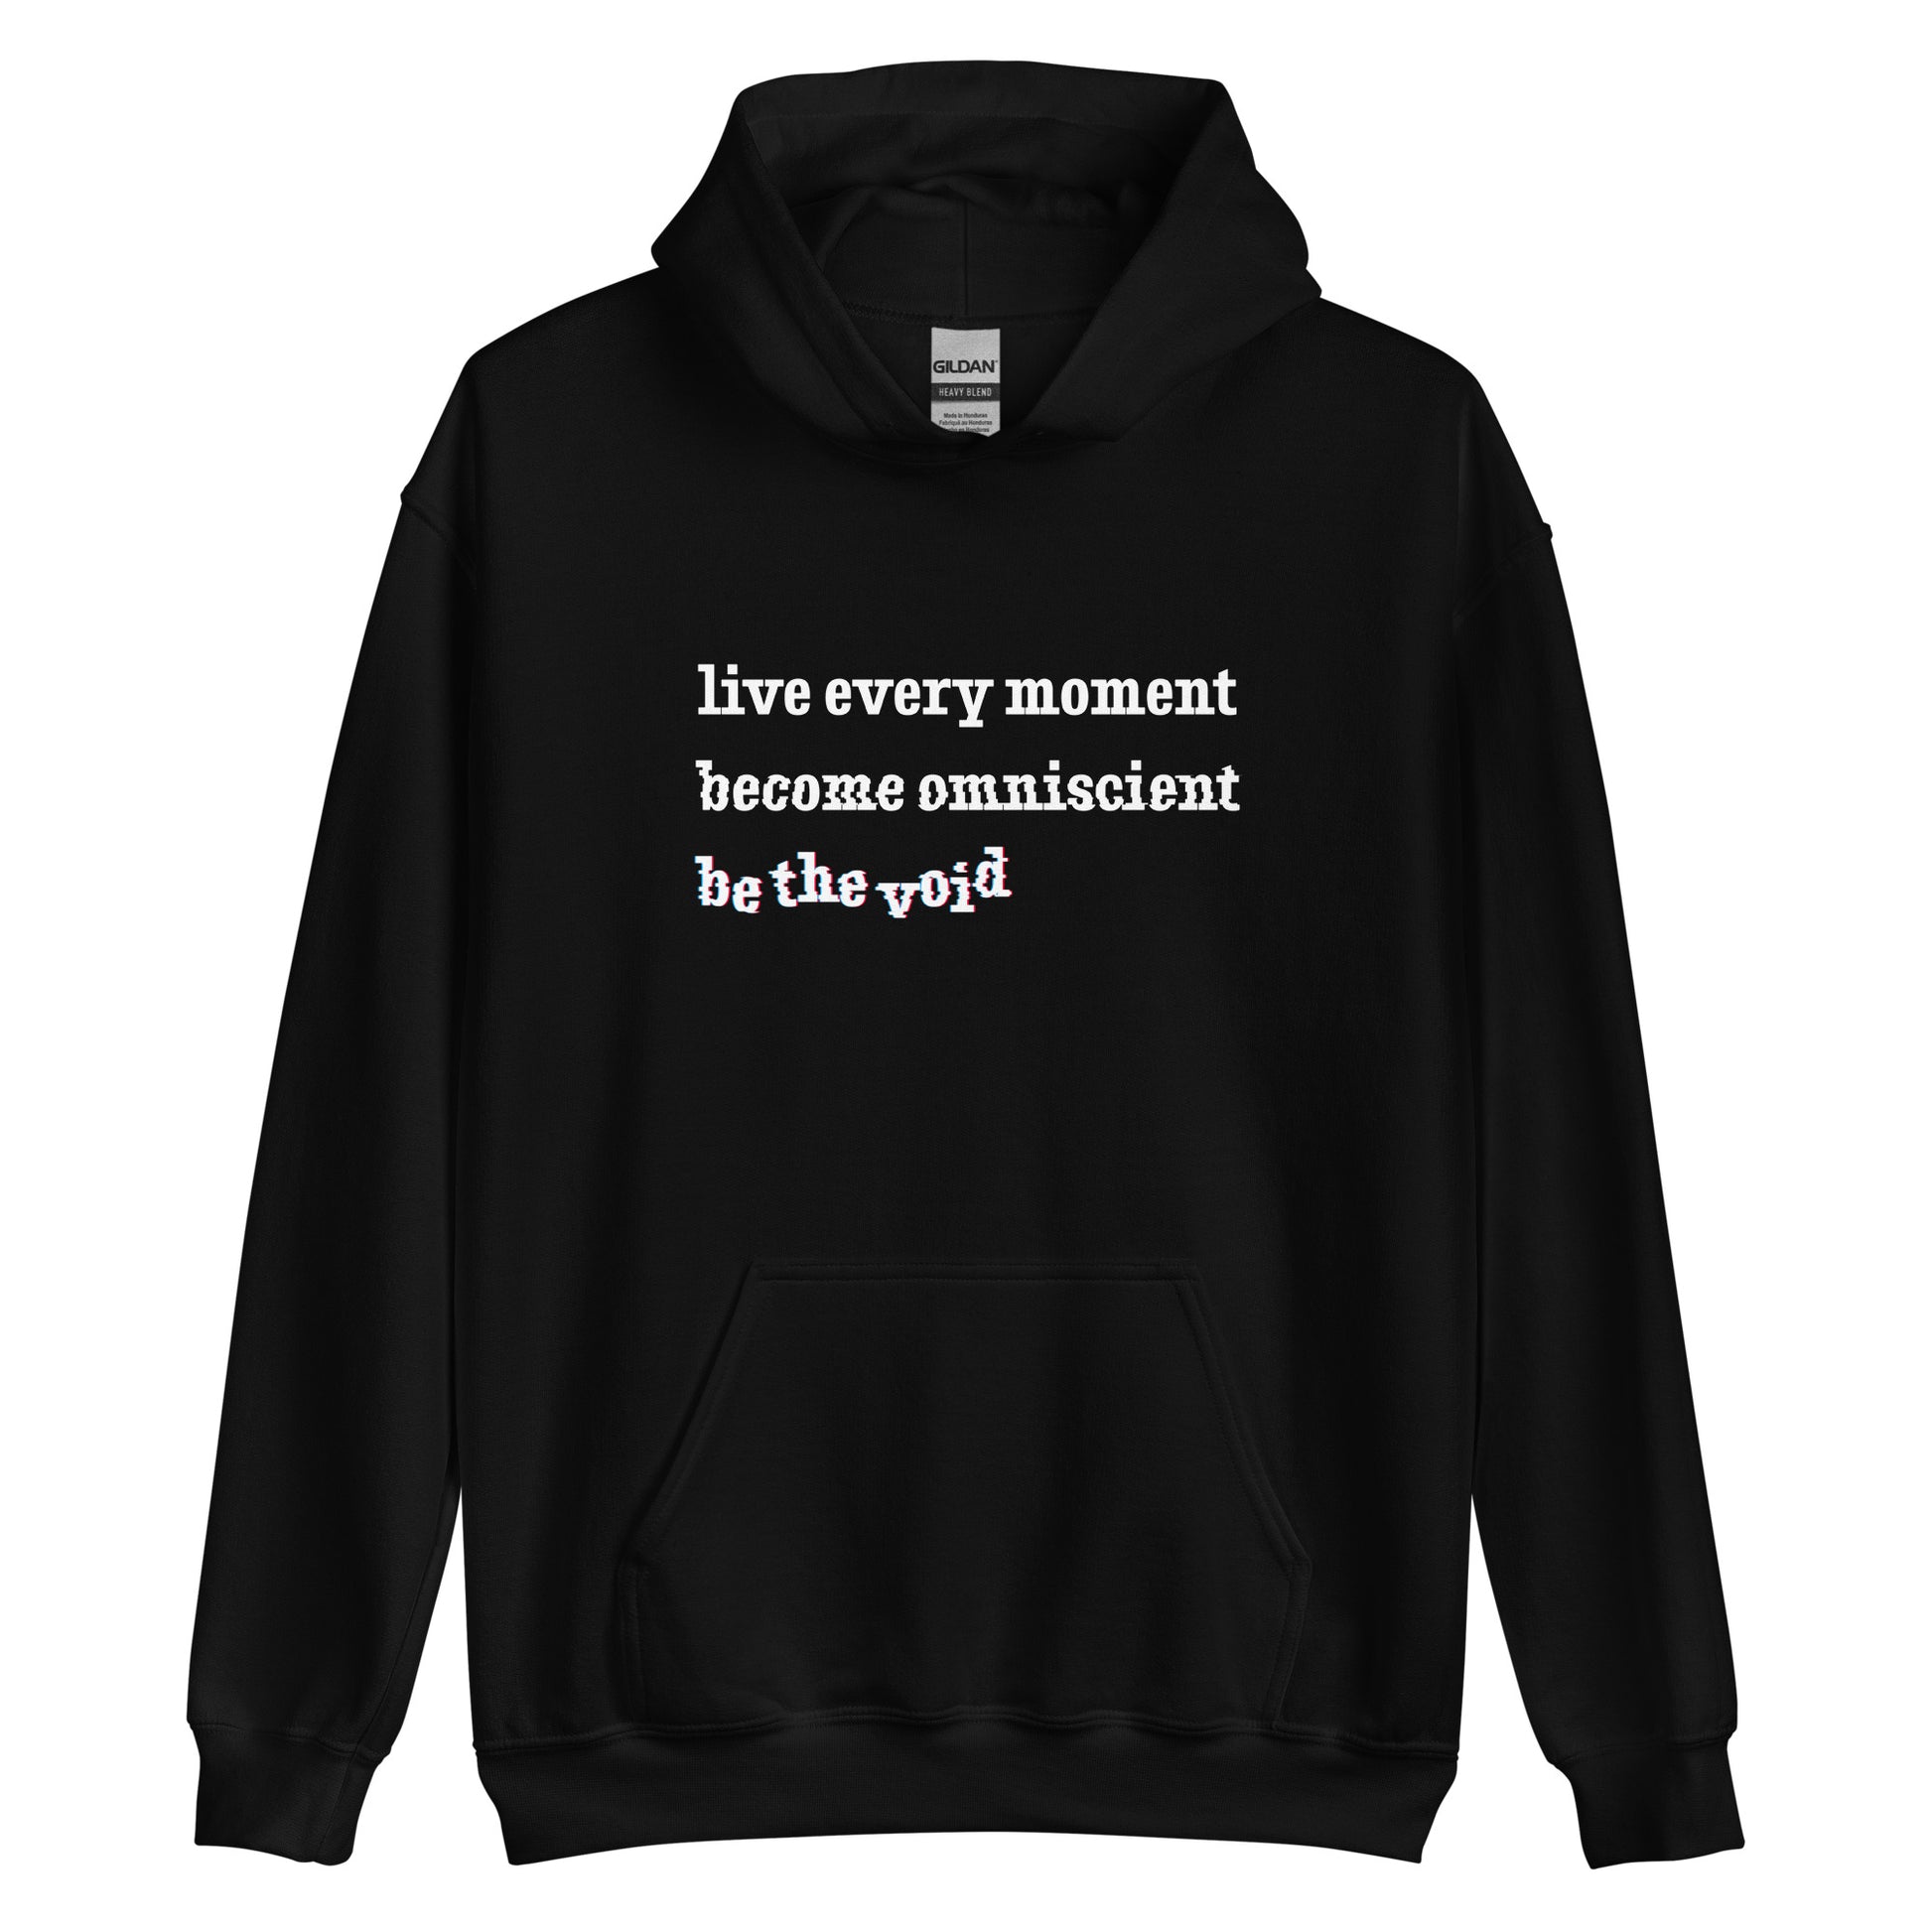 A black hooded sweatshirt featuring text reading "live every moment, become omniscient, be the void" in an increasingly distorted font.